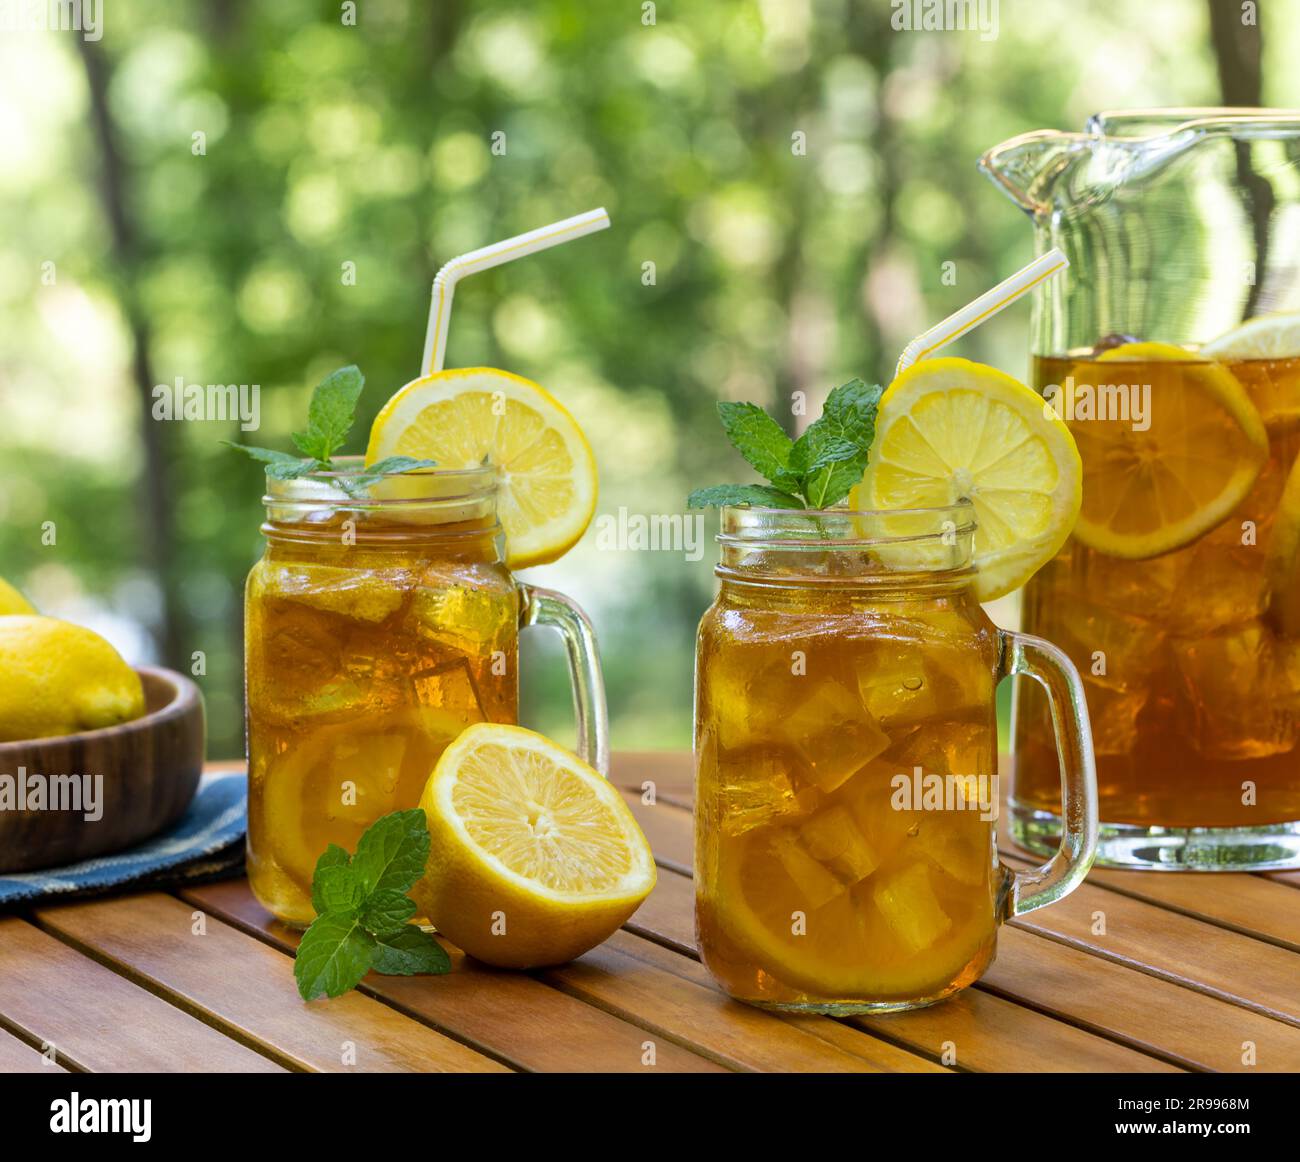 https://c8.alamy.com/comp/2R9968M/ice-tea-in-glasses-and-pitcher-with-lemon-and-mint-on-wooden-table-with-nature-background-2R9968M.jpg